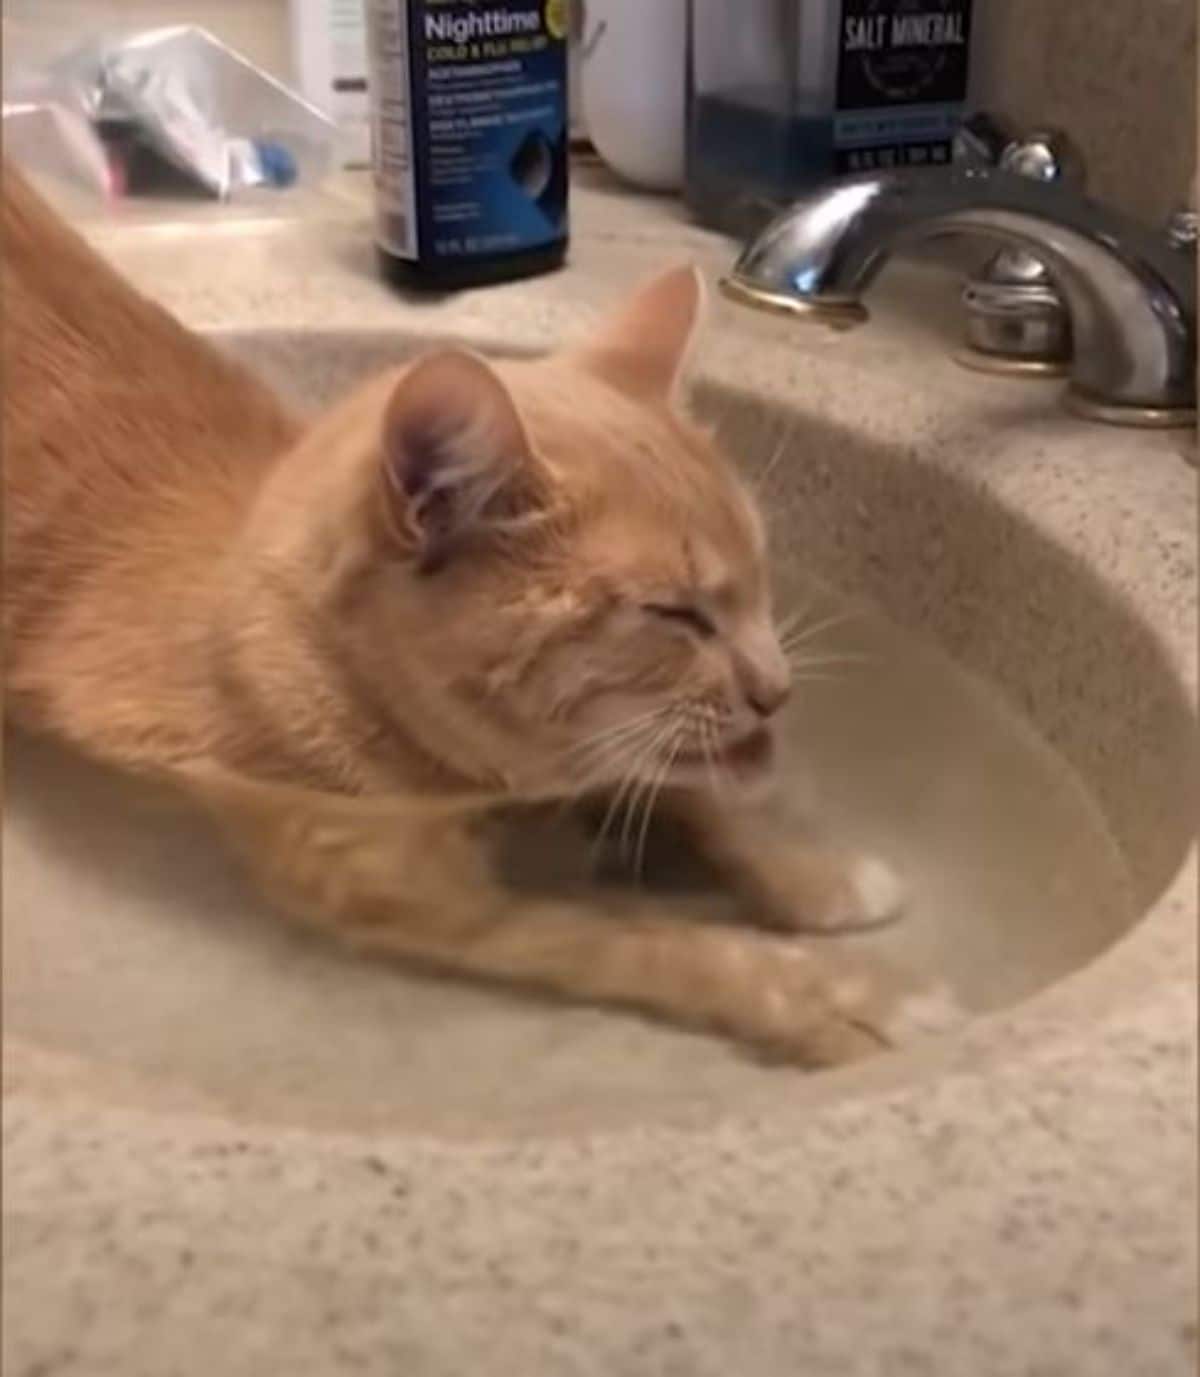 orange cat sitting half in a washbasin filled with water and drinking from it